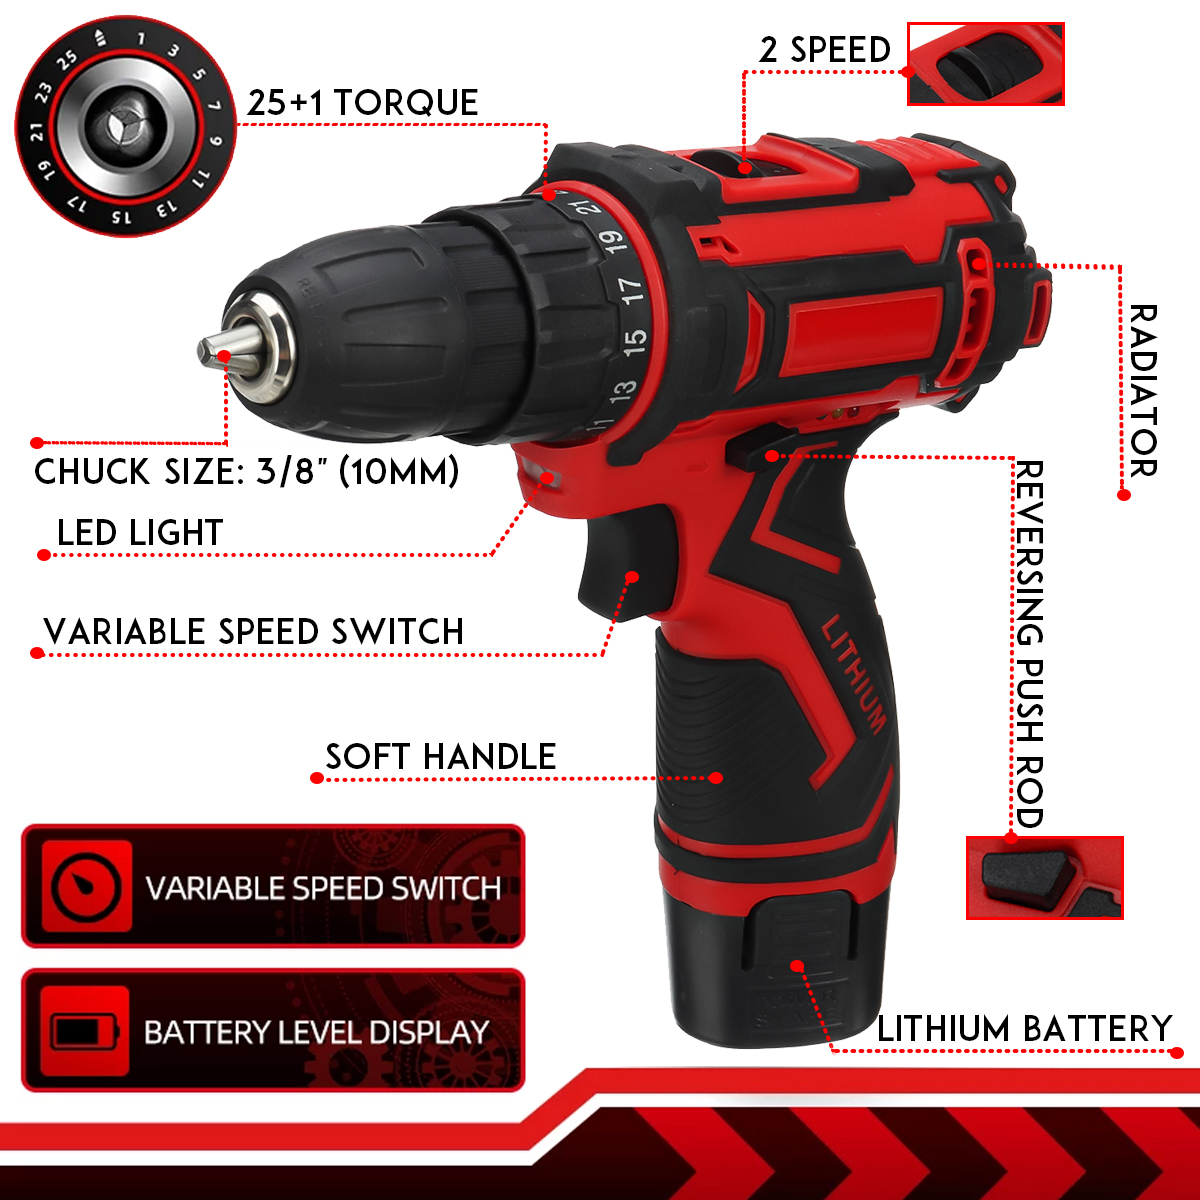 12V-300W-2-Speed-Cordless-Drill-Driver-251-Torque-1350-RPM-10mm-Electric-Screwdriver-W-12-Battery-1867946-2